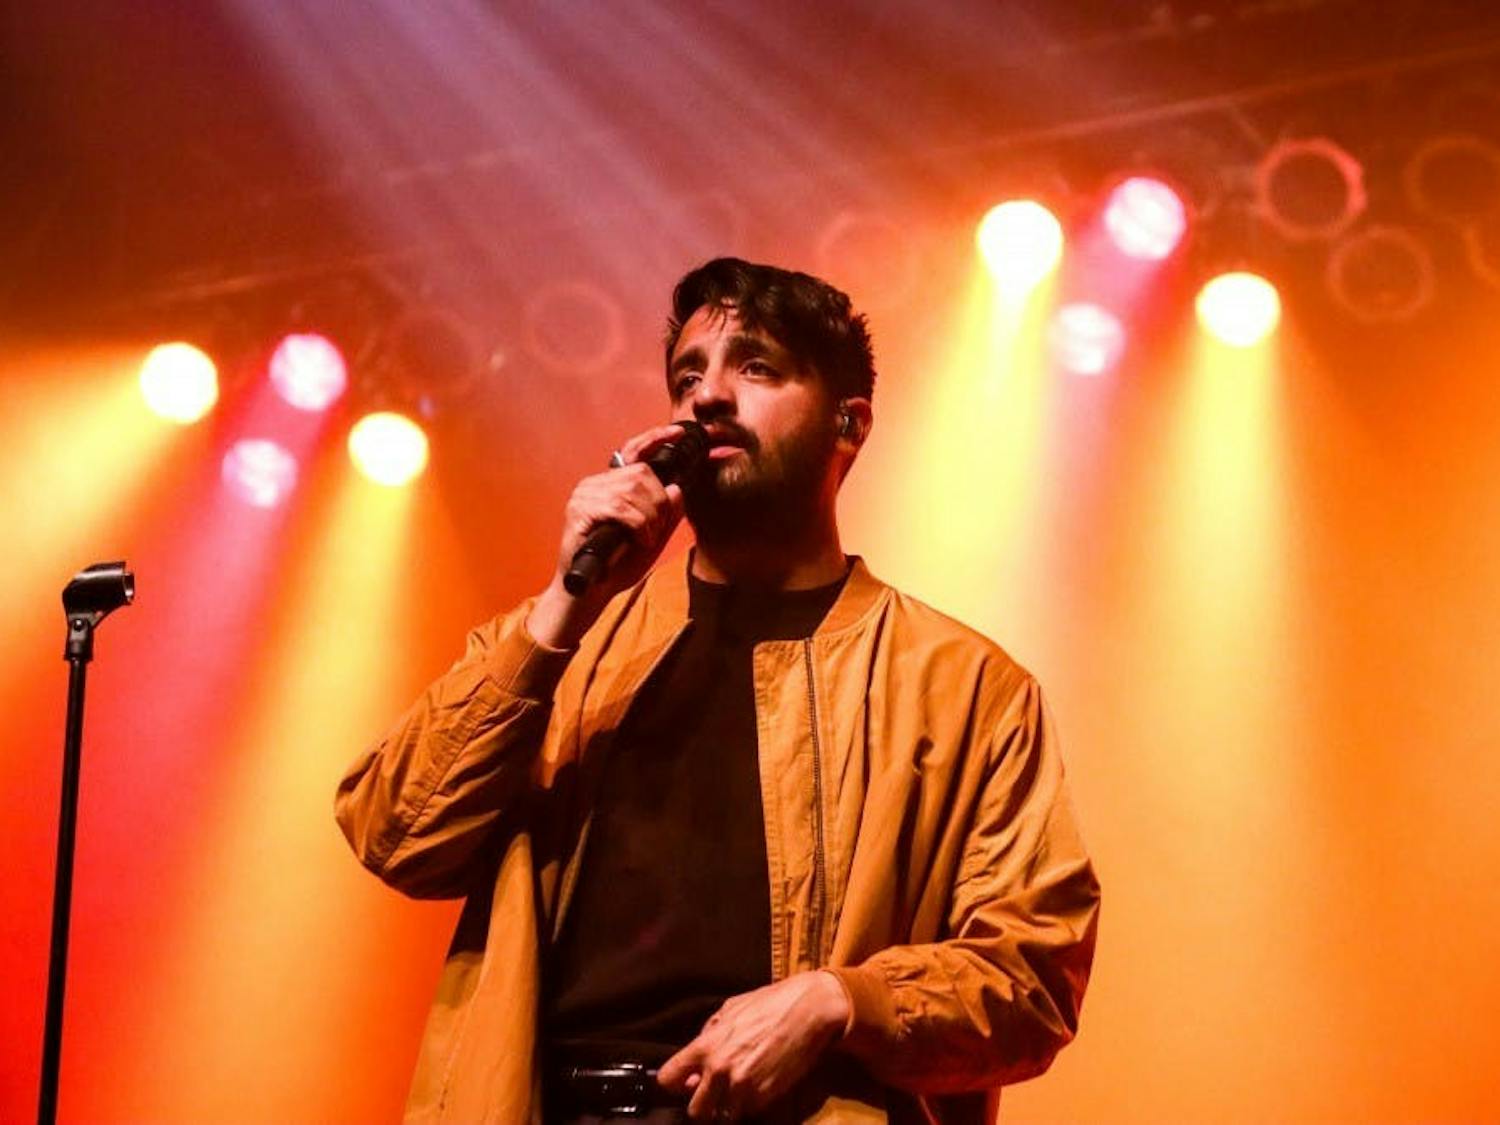 Sameer Gadhia, lead singer of Young the Giant, headlined Fall Fest in 2019, the last Fall Fest before the pandemic.&nbsp;